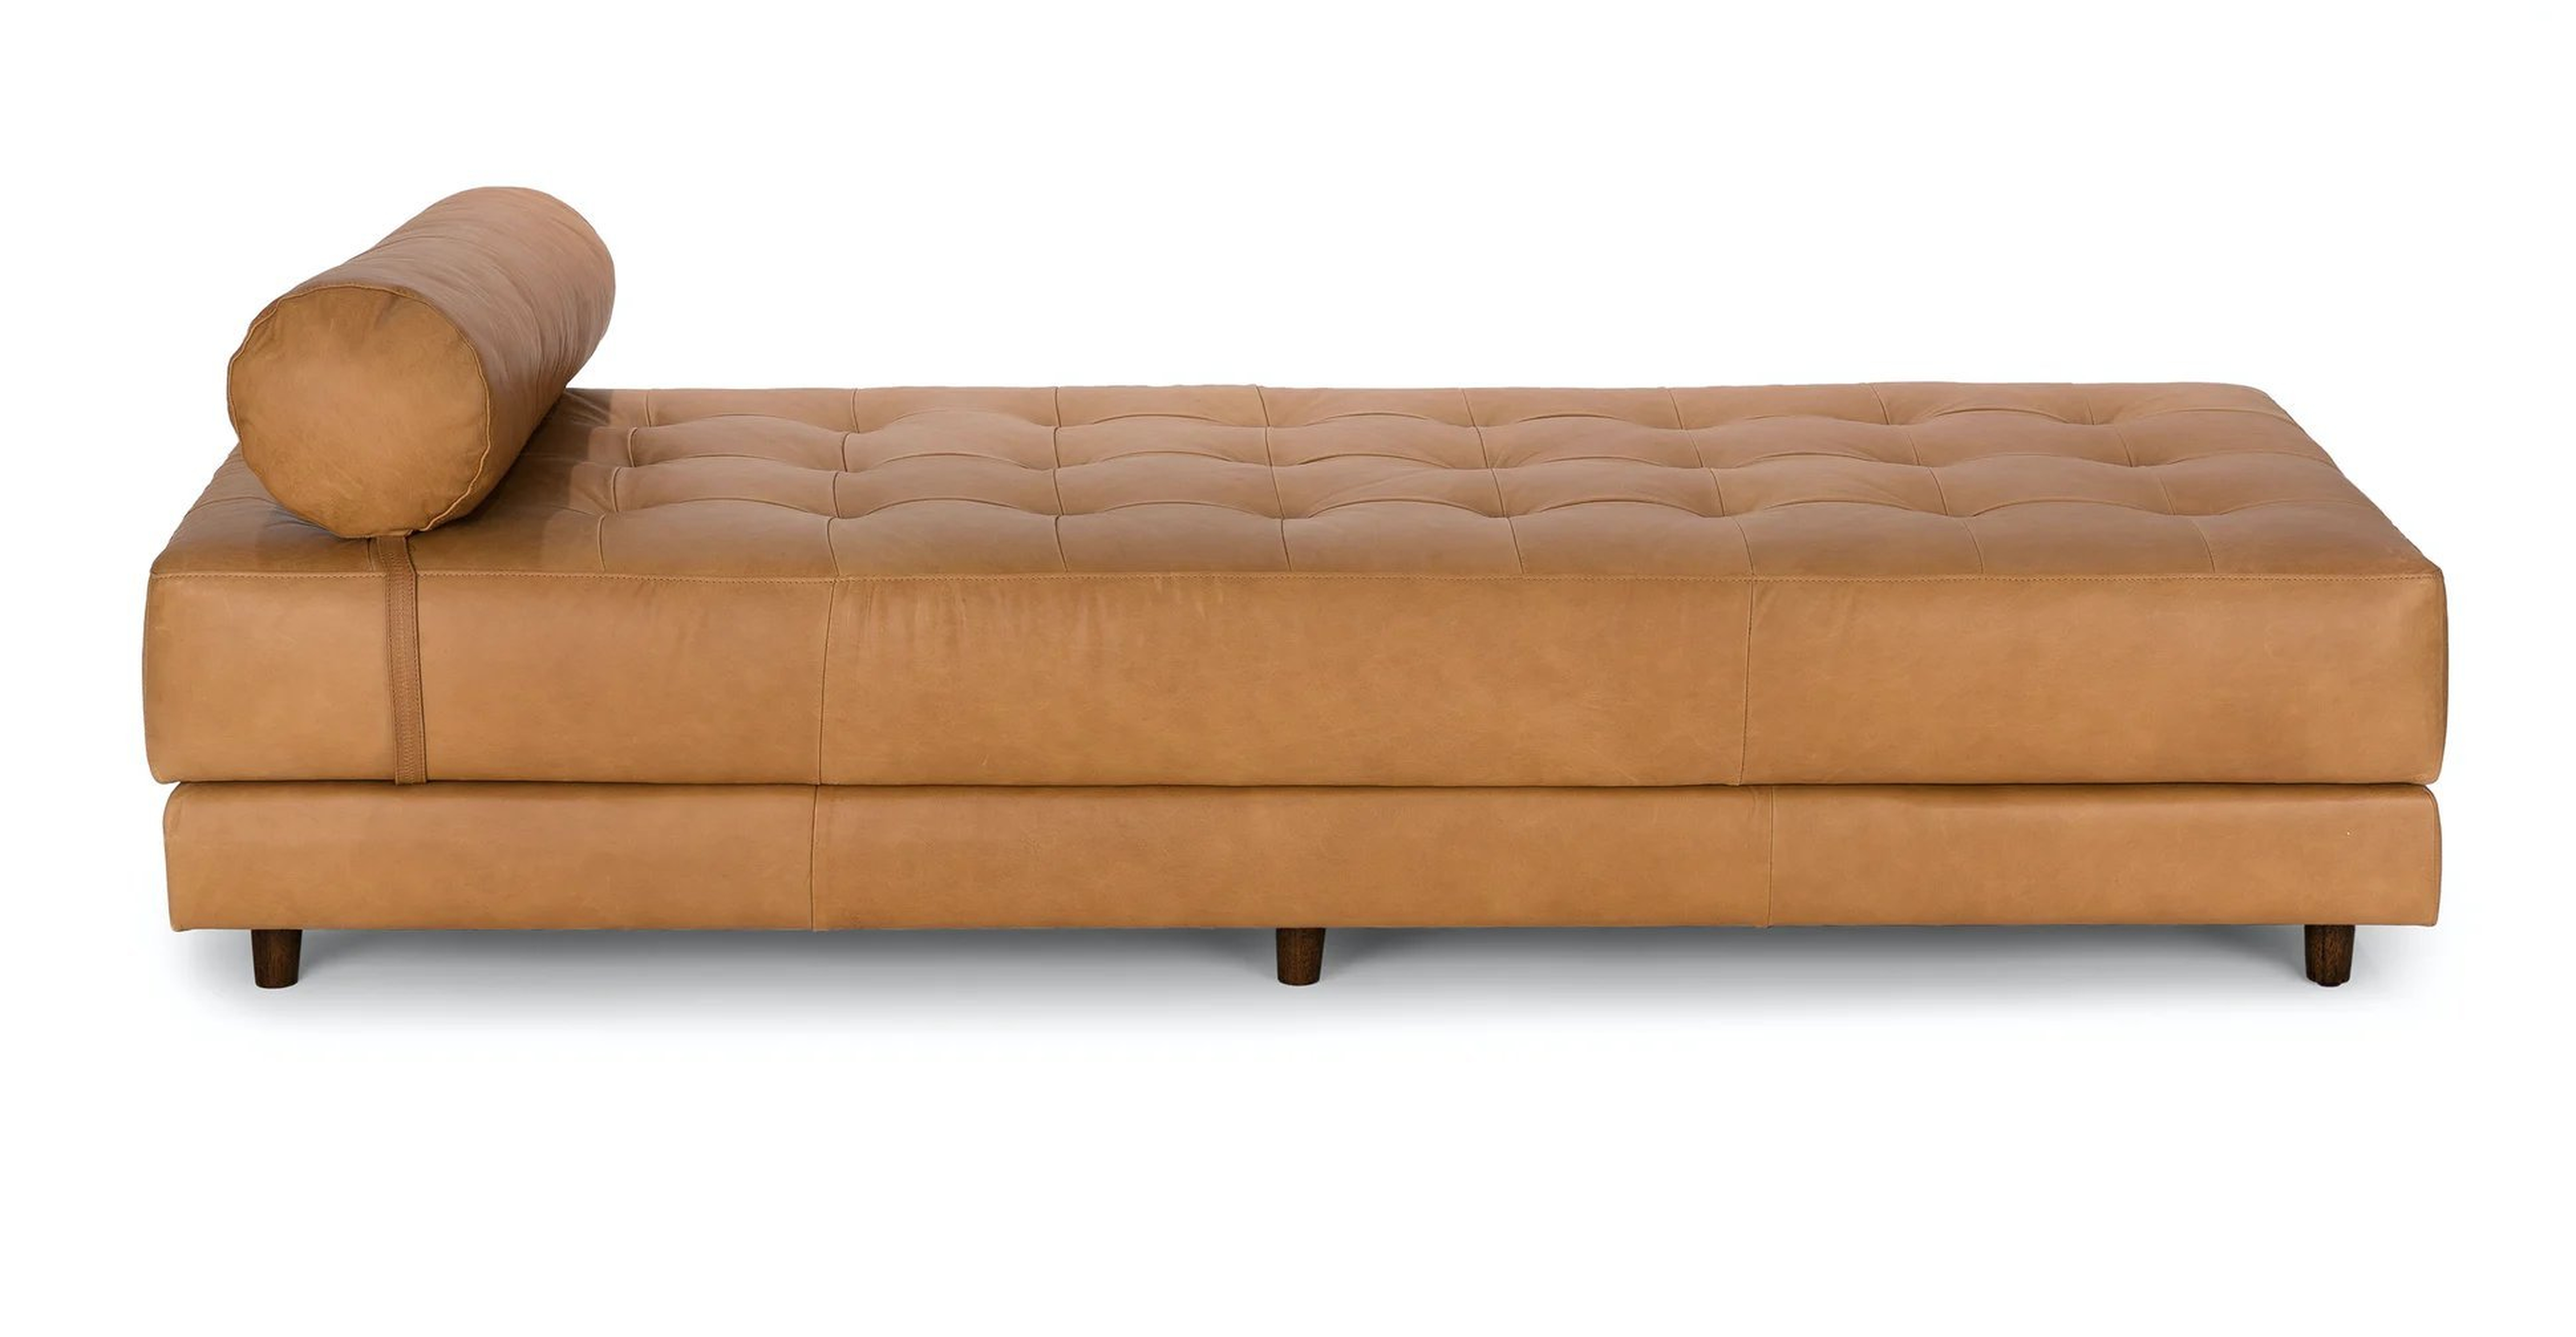 Sven Charme Tan Chaise Lounge - Article